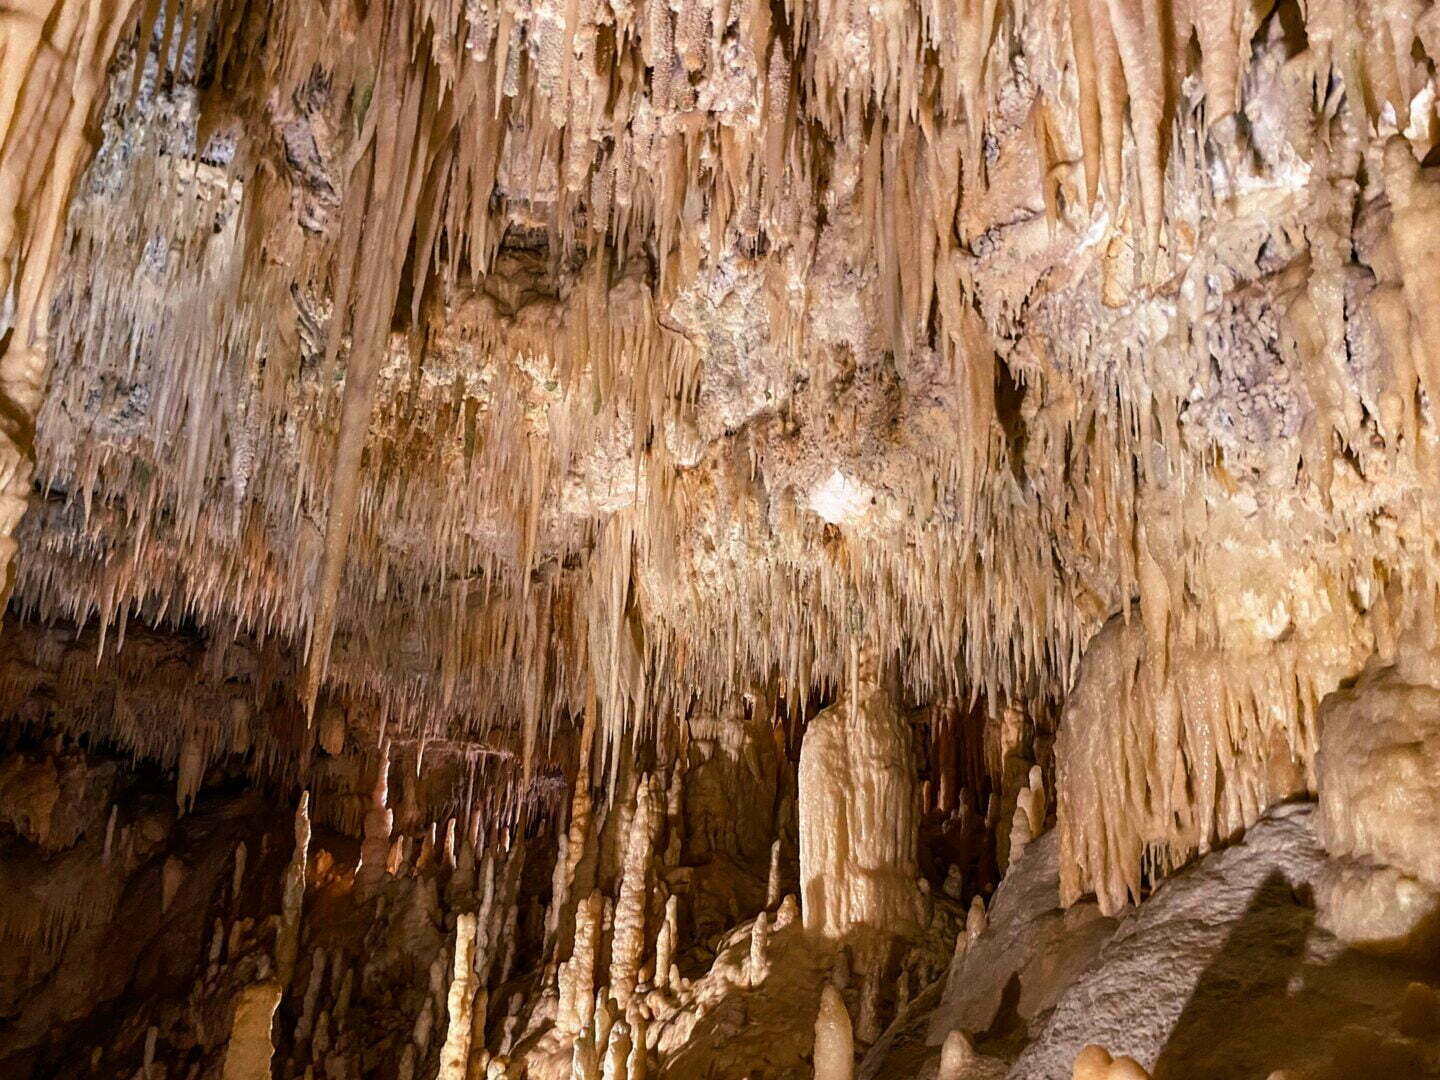 Italy - The most beautiful stalactite cave in the world, the Grotte di Castellana